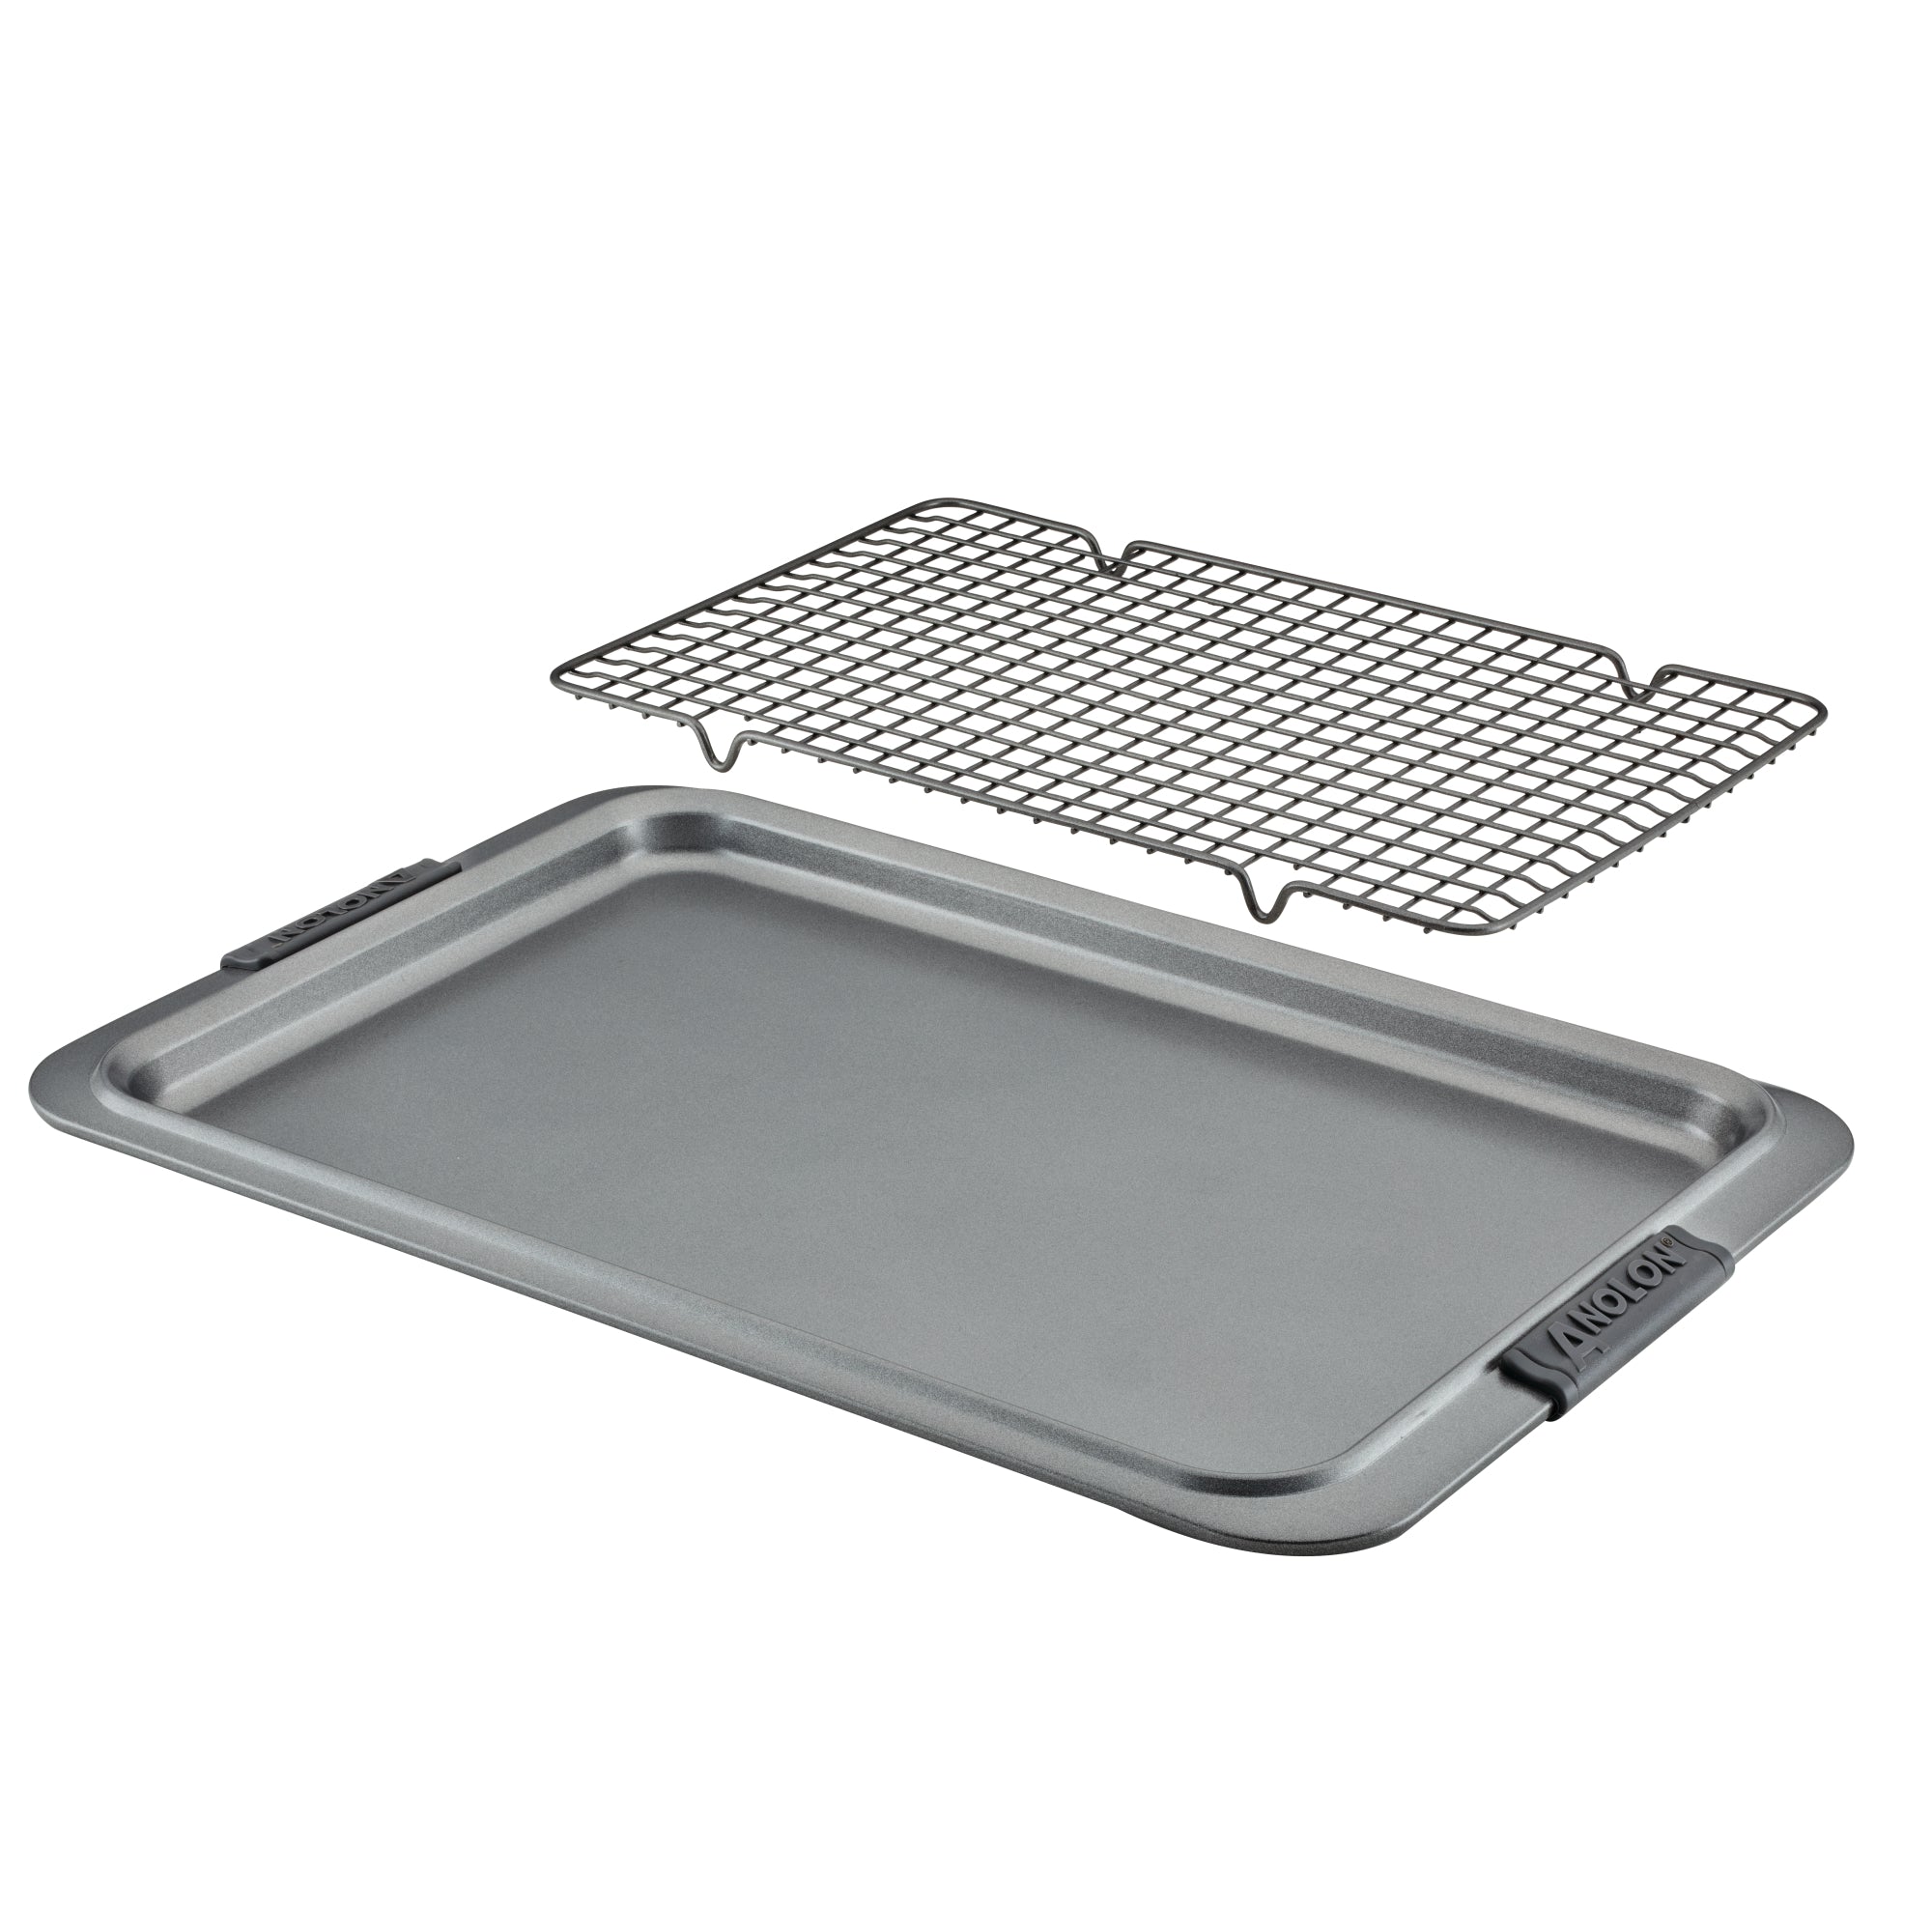  EANINNO Baking Sheet with Wire Rack, Stainless Steel